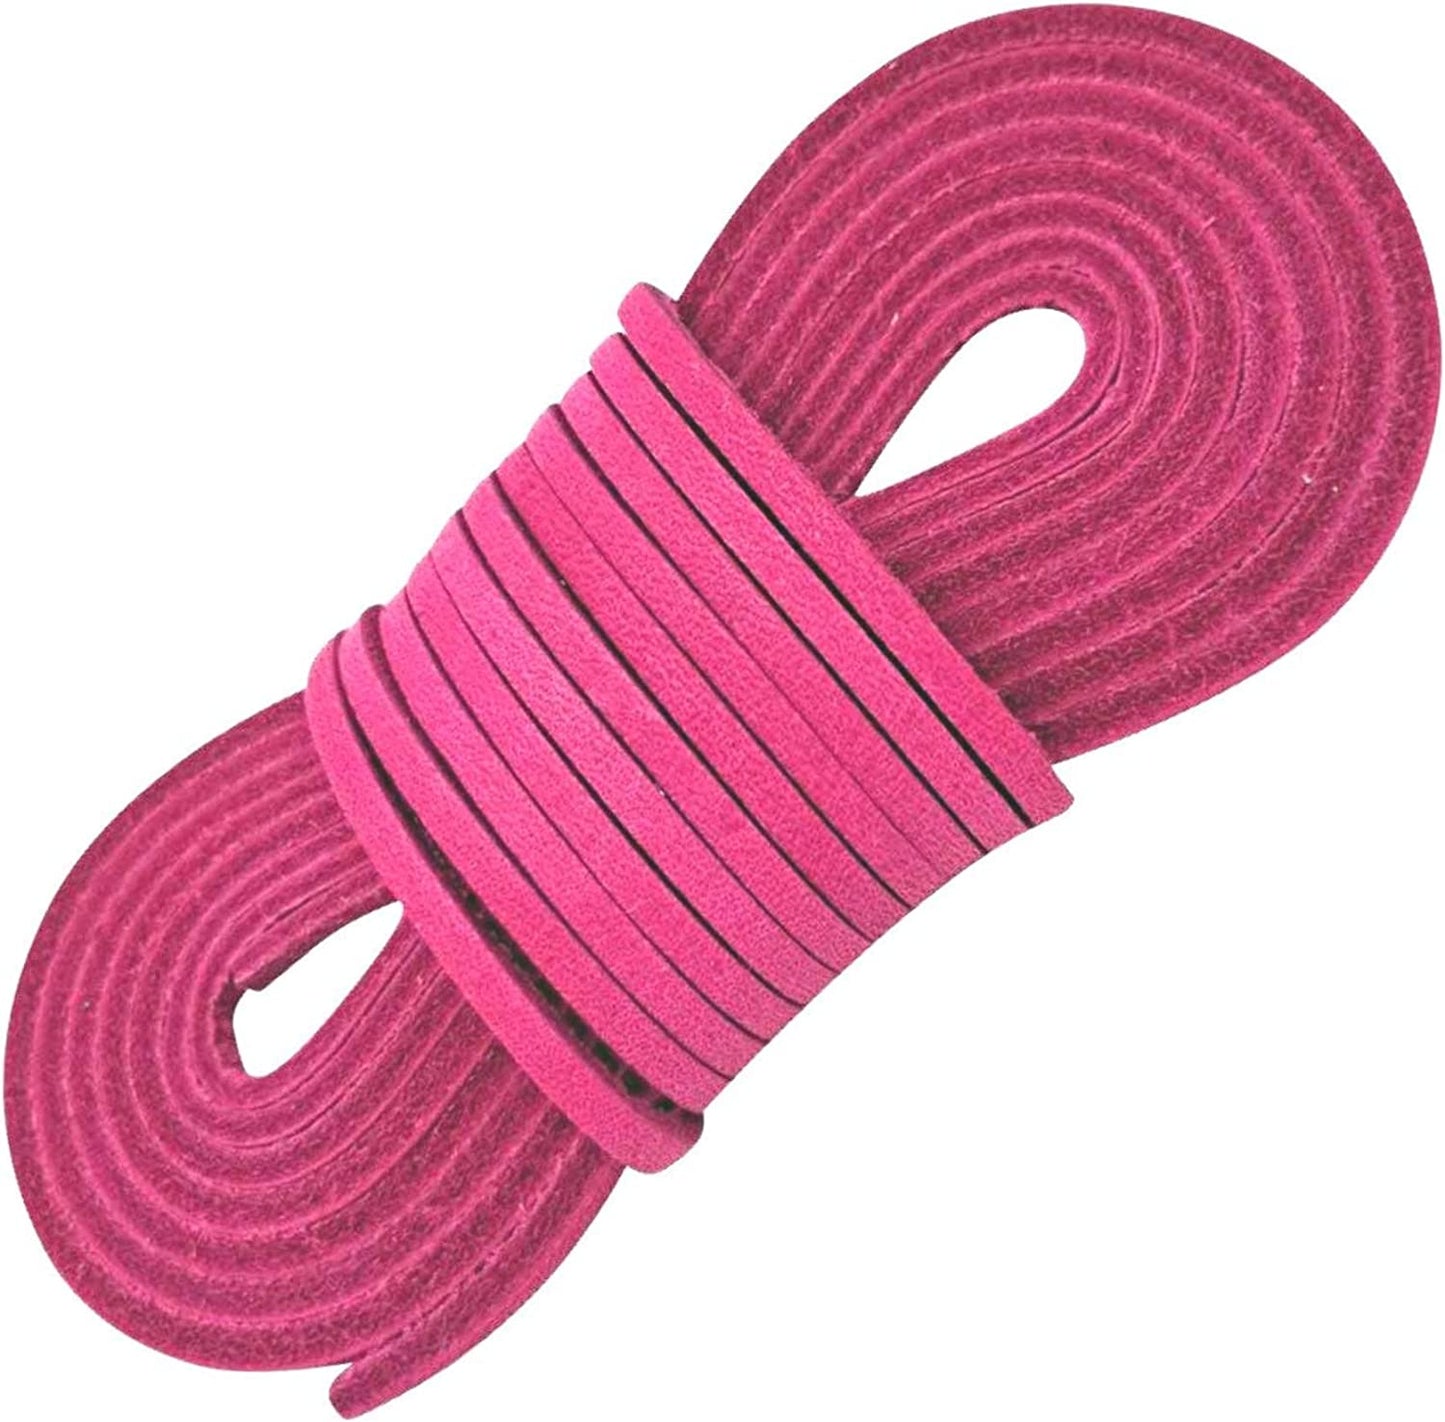 TOFL Leather Boot Laces, 72 Inches Long, 1/8 Inch Thick